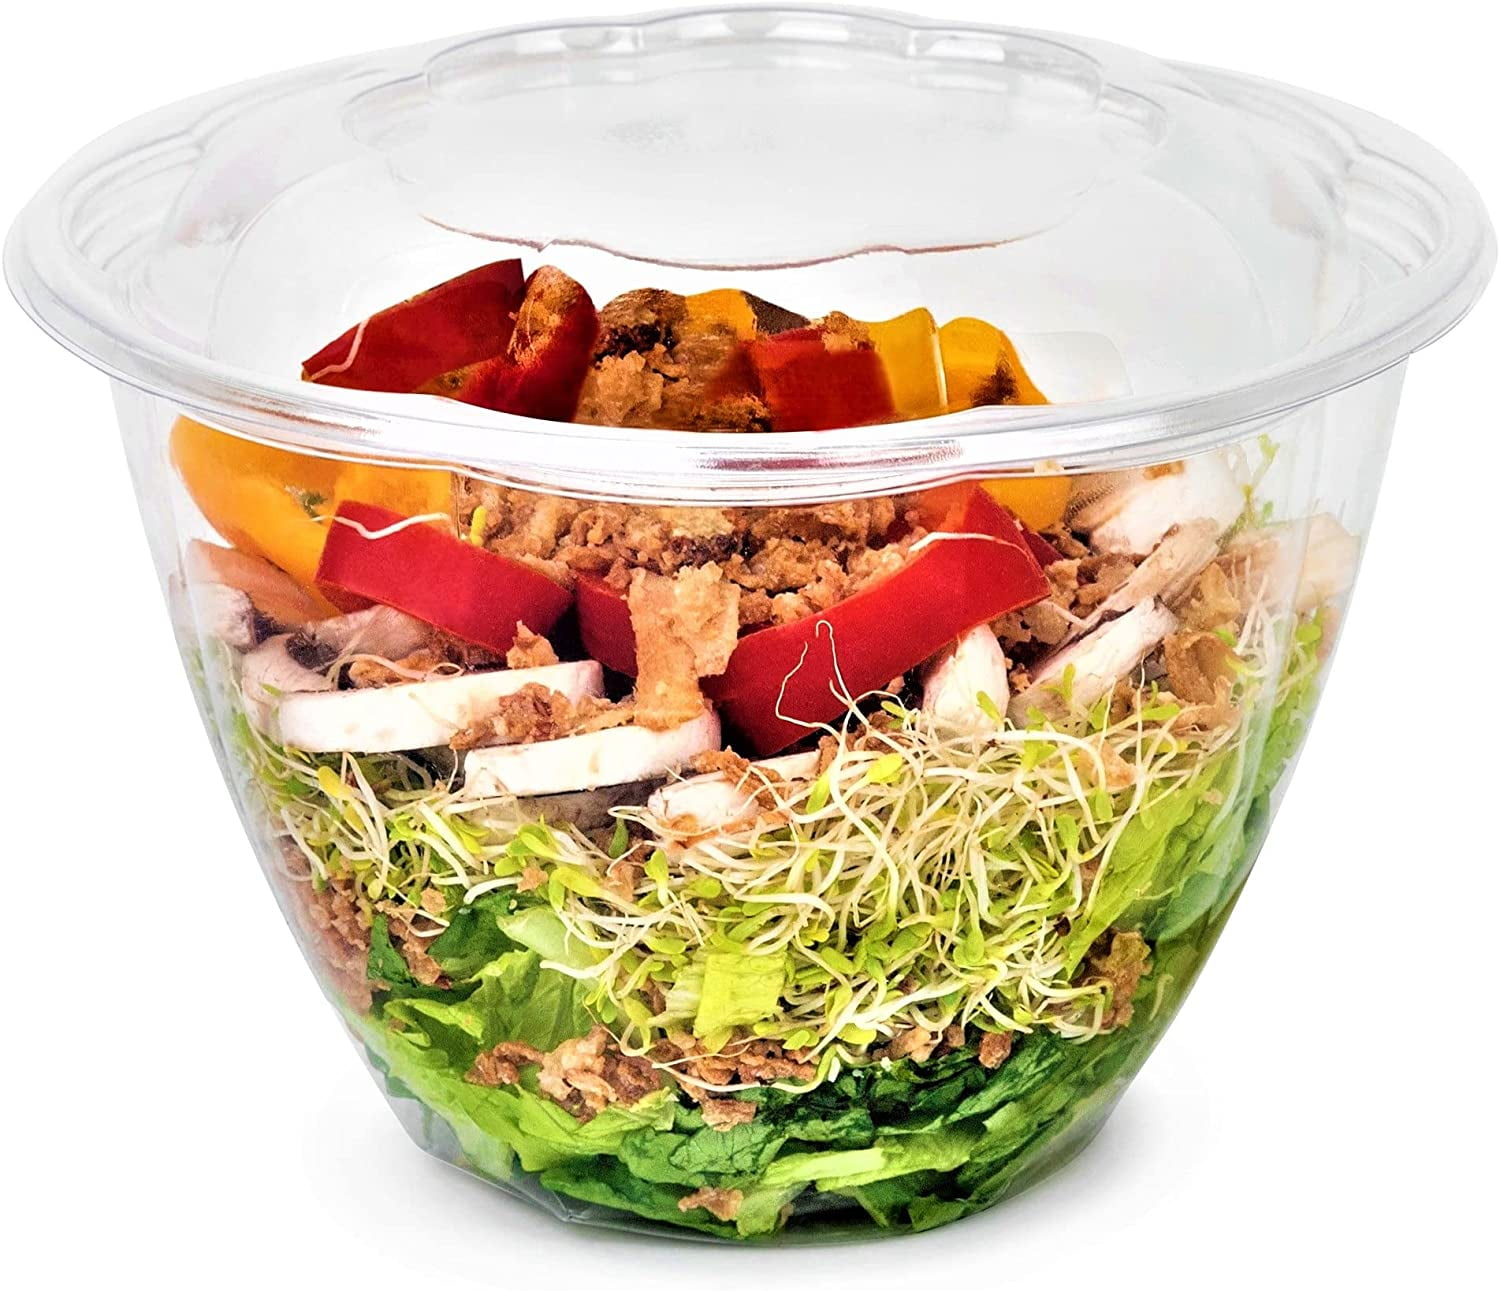 48 oz Disposable BPA Free Salad Containers with Lids inClear Plastic Disposable for A Fresh Airtight Seal, Portable Serving Bowl Set for Meal Prep 